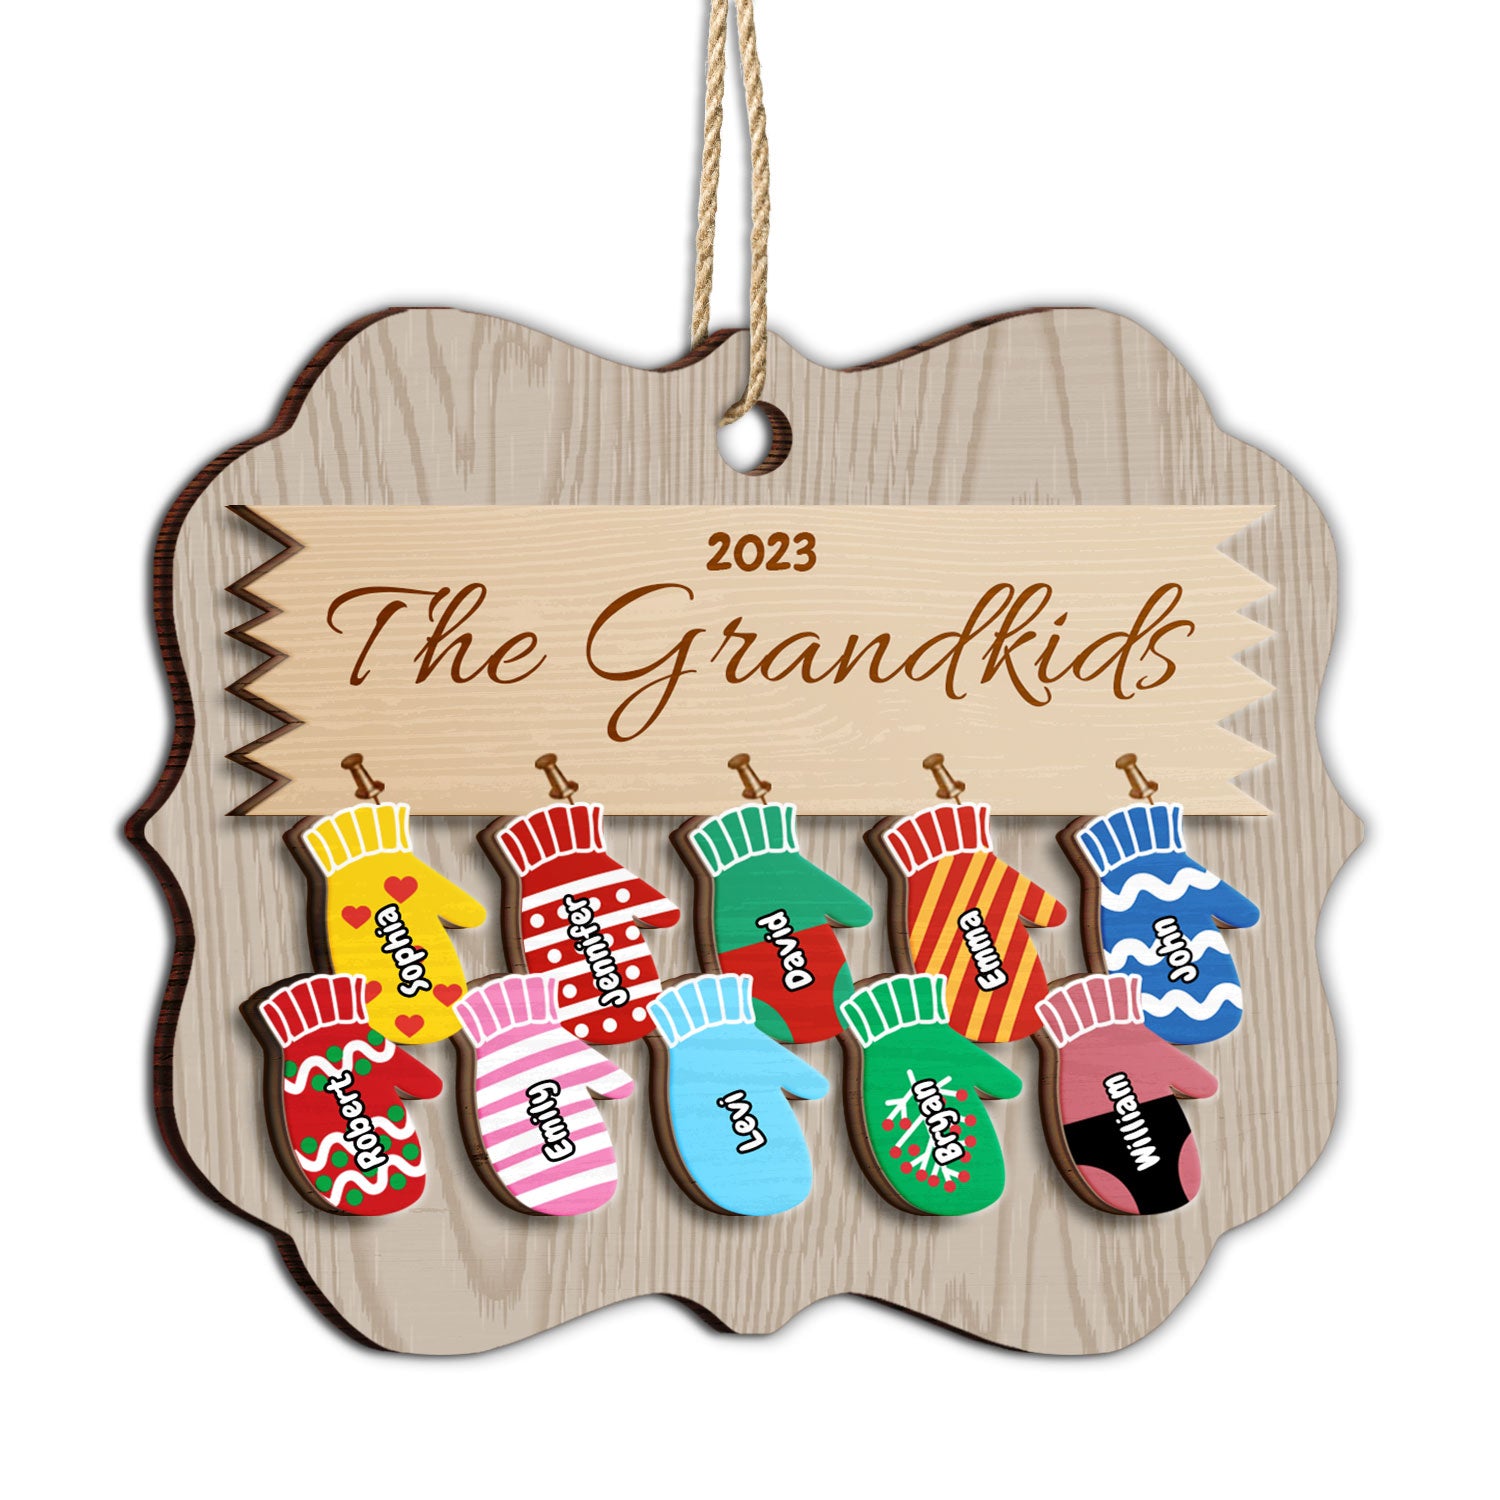 Mittens With Grandkids Names - Christmas Gift For Grandparent - Personalized 2-Layered Wooden Ornament